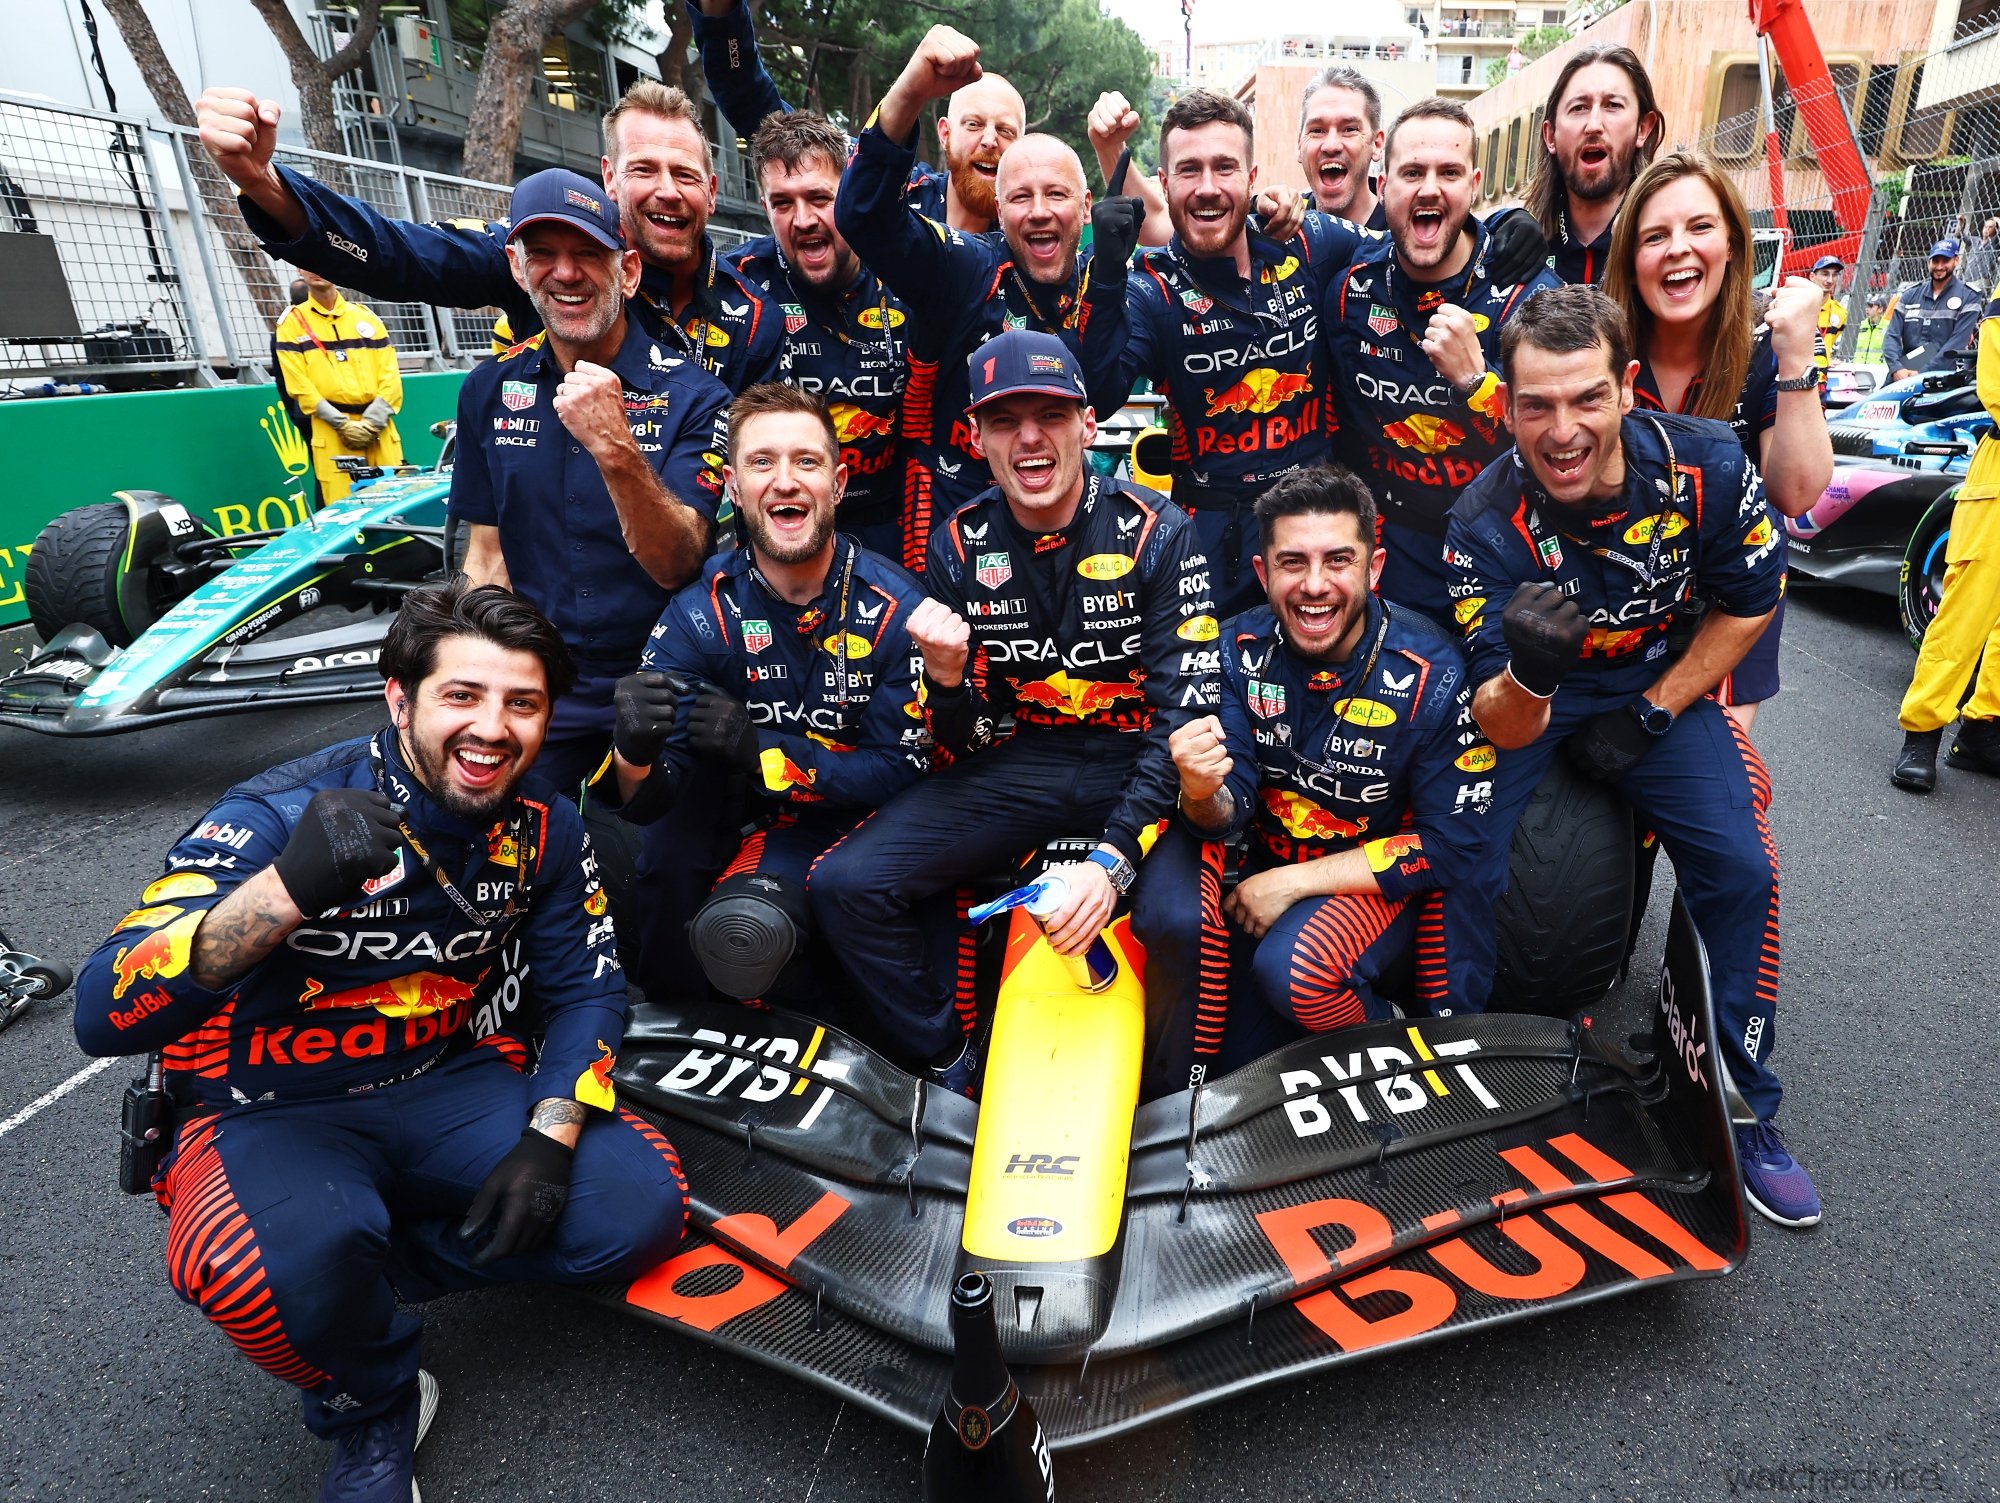 Louis Vuitton Celebrates Max Verstappen's Victory At The 80th